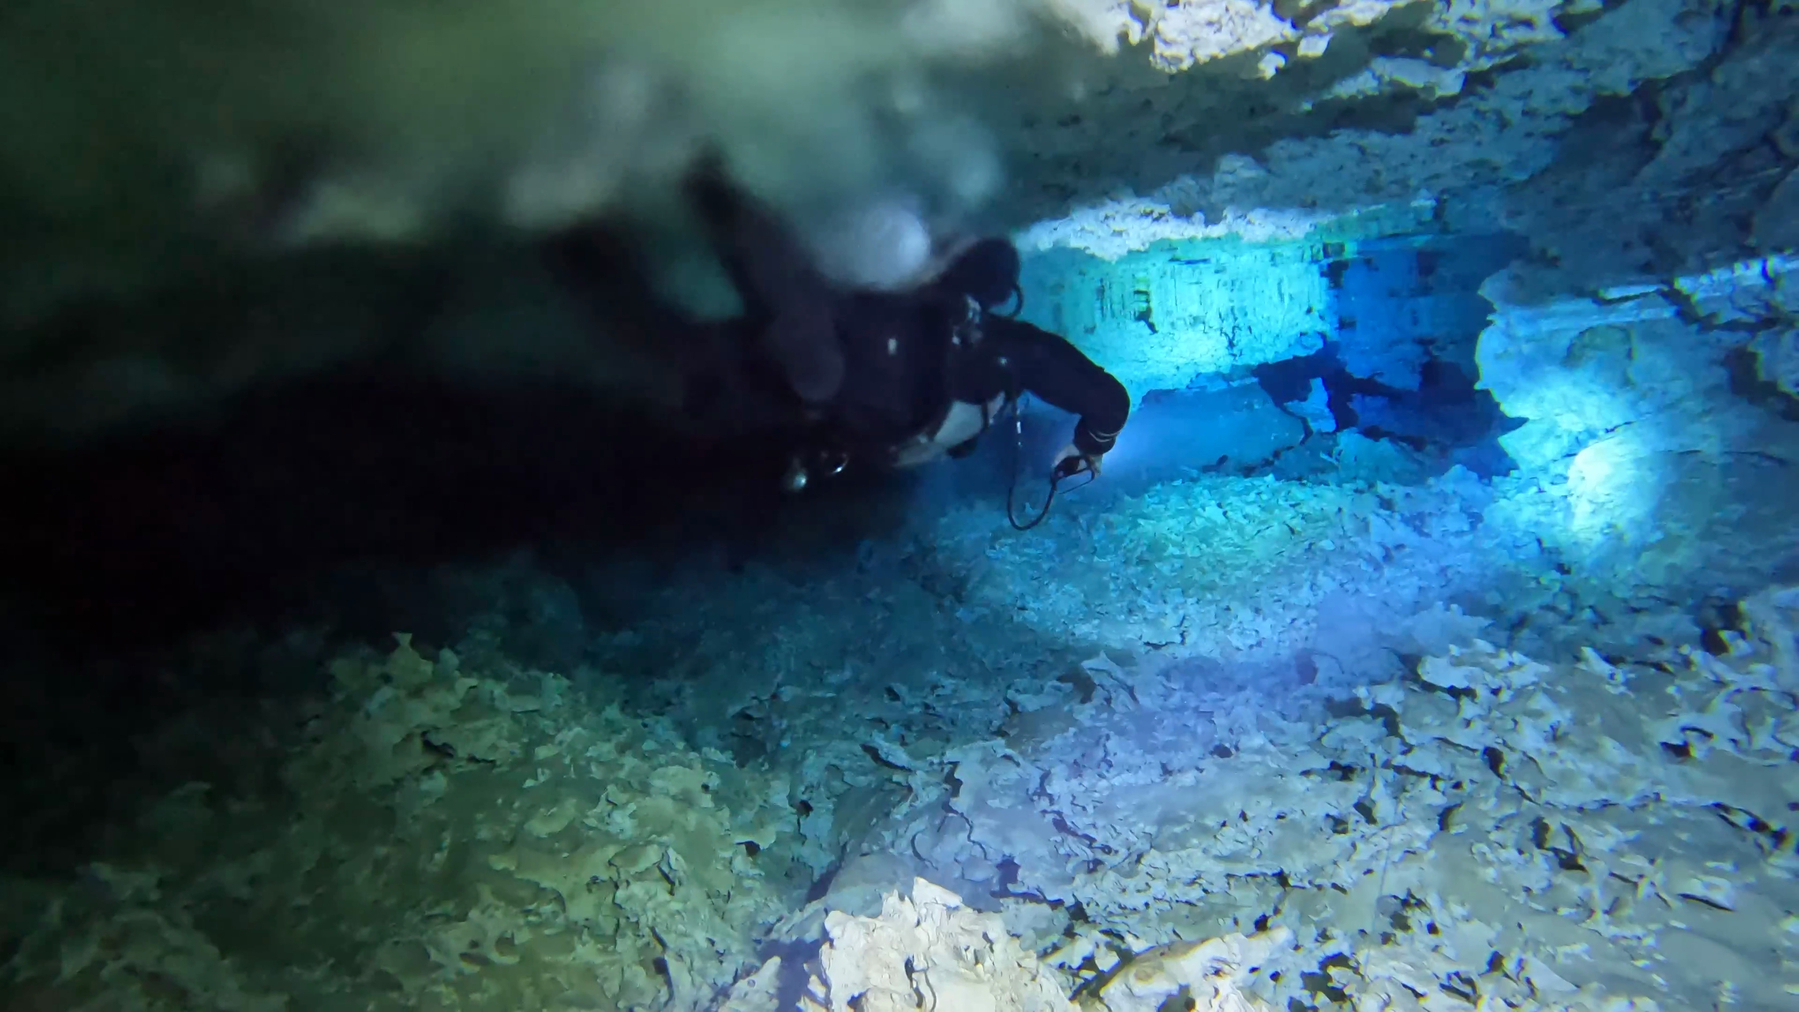 A diver swimming through a brightly lit white pock marked cave, through the middle of the halocline mixing the fresh and salt water layers, trailing a blurry interface behind them.